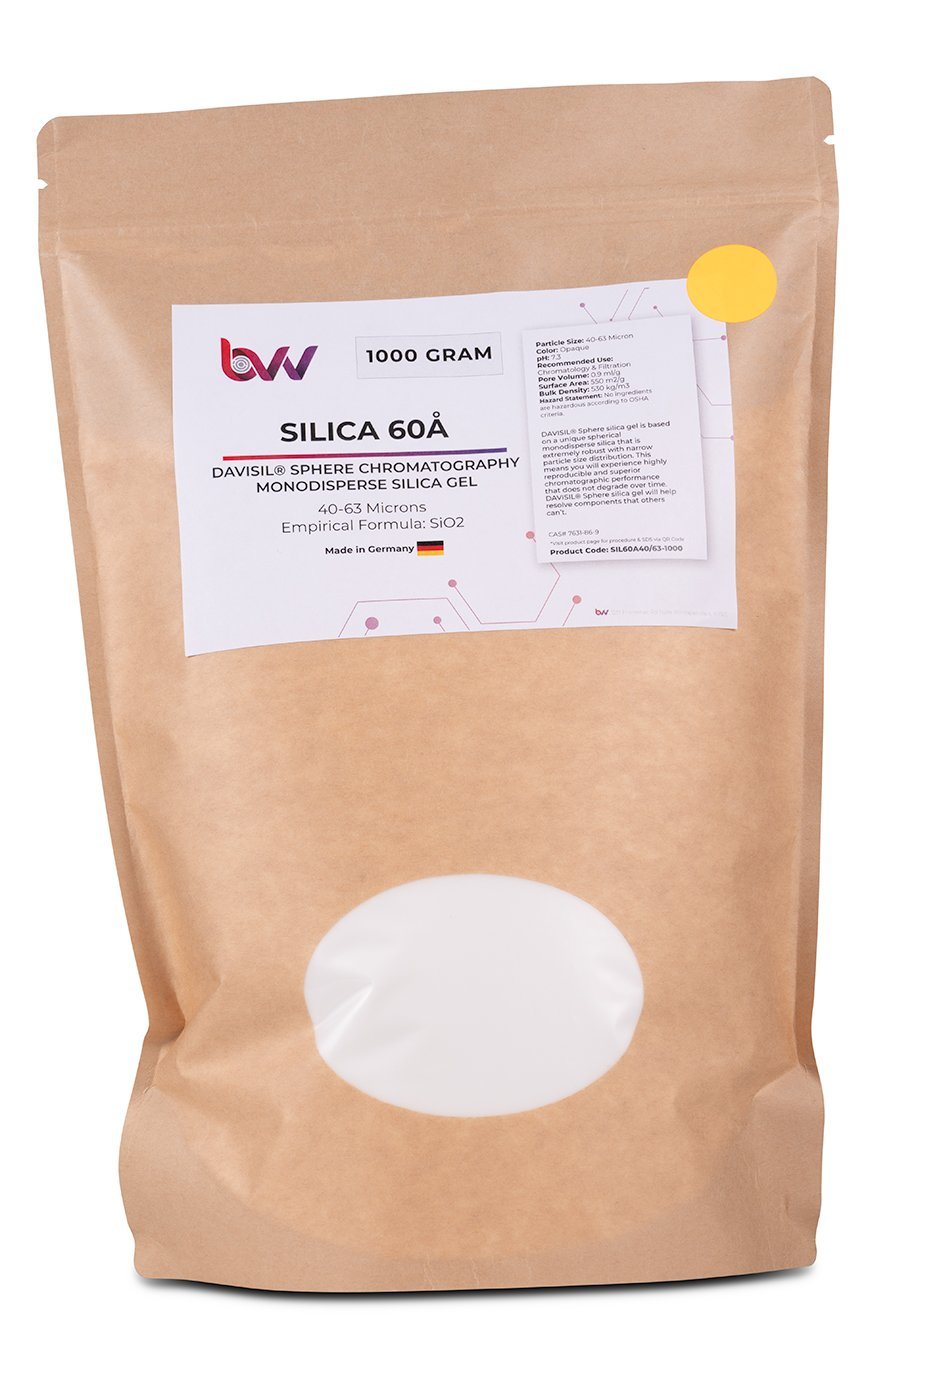 Chromatographic Silica 60A 40-63μm (Made in Germany) New Products BVV 1000 Grams